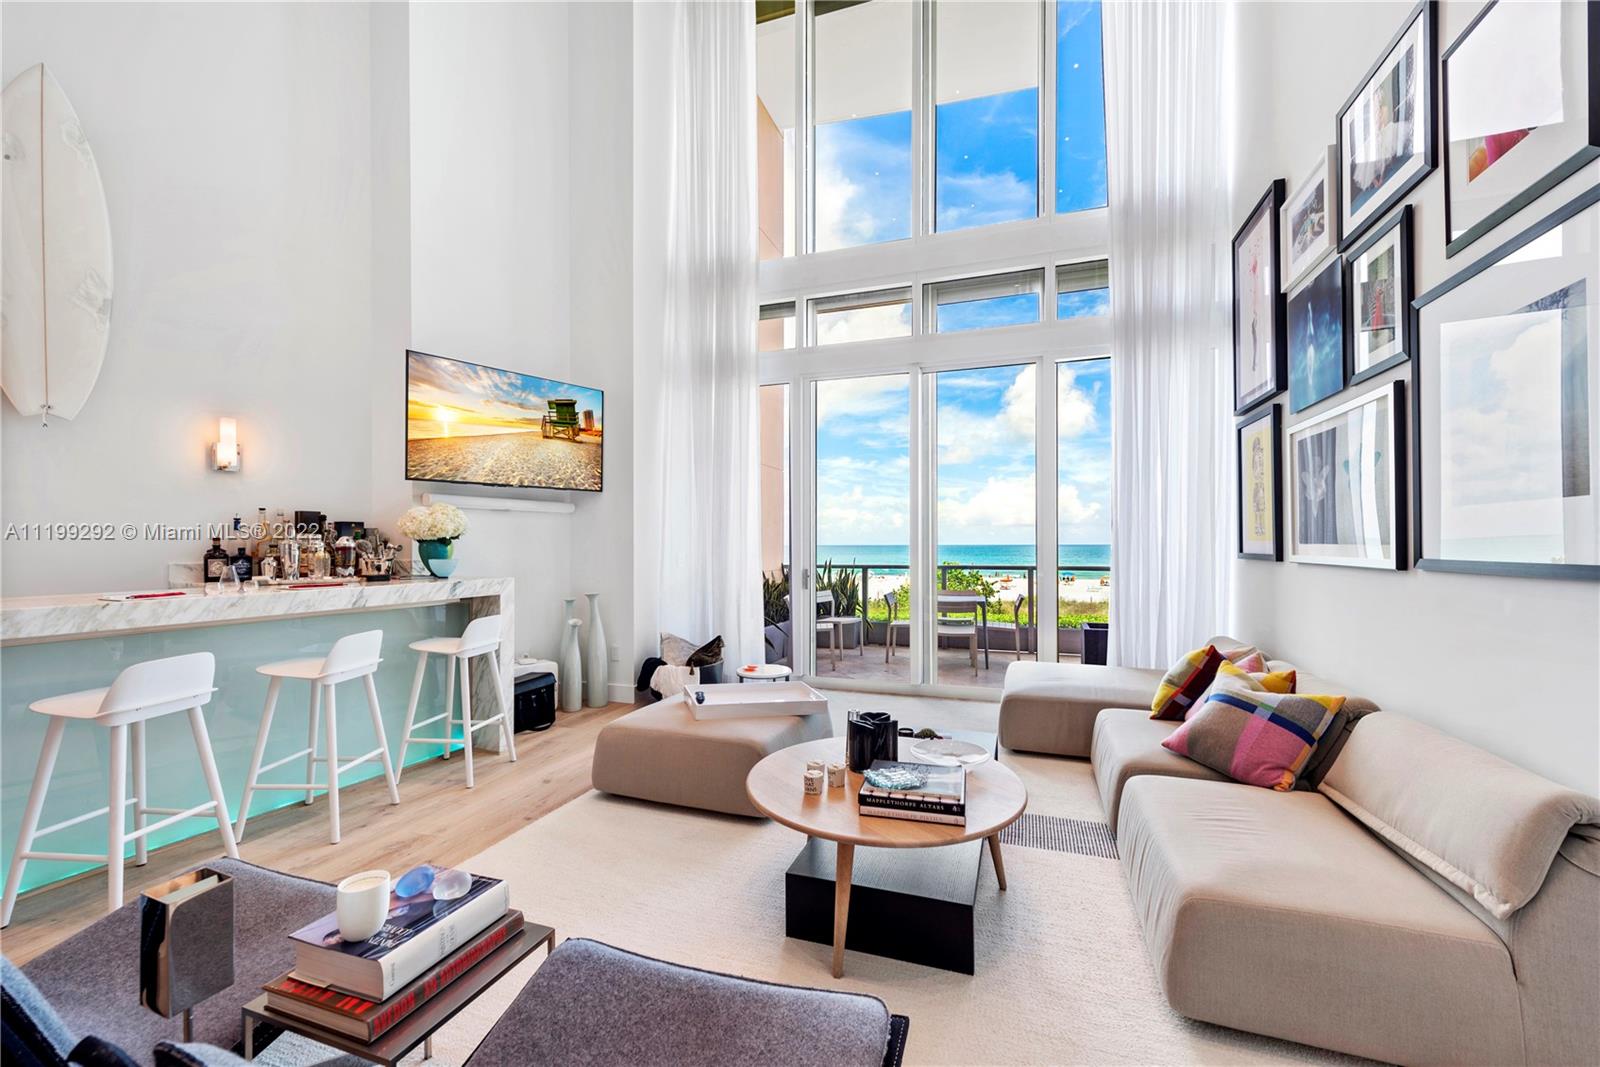 Unique loft-style beachfront residence in the world renowned Il Villaggio of Miami Beach. This fully-reconstructed 2-story townhouse features a contemporary and stylish design throughout complemented by stunning oceanfront views which can be enjoyed from multiple vantage points including a private balcony - perfect for outdoor entertainment and enjoying the perfect South Florida weather. BH-03 is one of only six Beach Houses in Il Villaggio and has 3 private entrances for an extra feel of safety and exclusivity. Featuring a sophisticated blend of elegance and modern design, BH-03 boasts 22-ft ceilings, luxurious finishes, and an expansive open floorplan. World-class amenities include private beach service, pool, grill, gym, concierge, security, and valet parking.